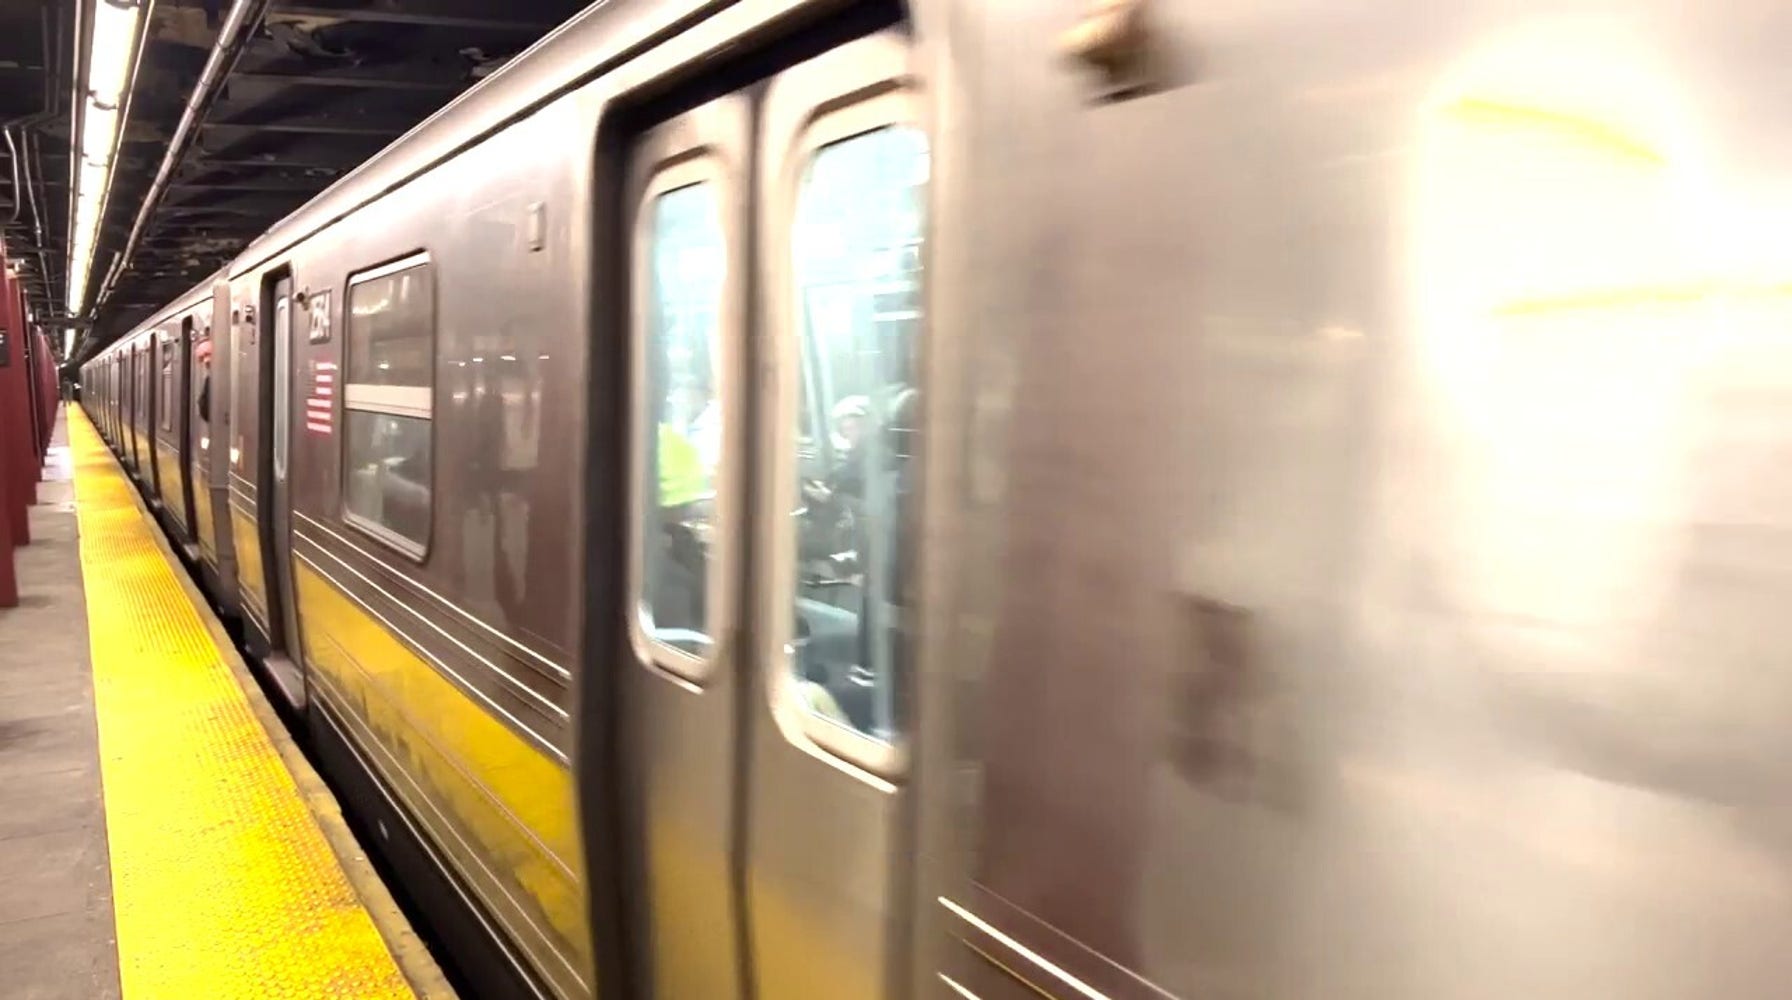 NYC Subway Showdown: Confrontation Sparks Outrage Over Vaping, ID Request